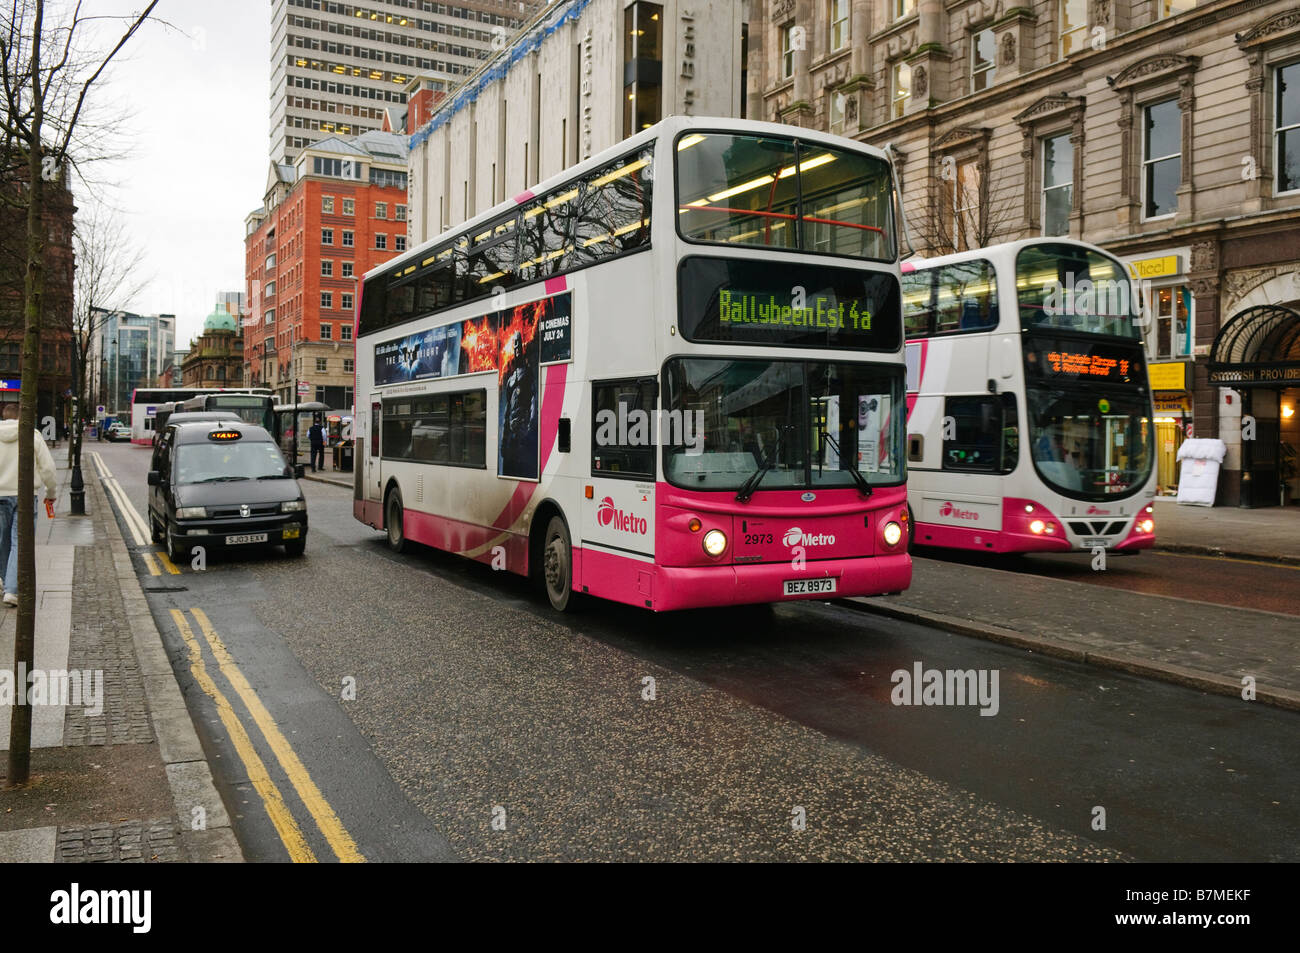 Metro/translink/citybus buses at Donegal Square West, Belfast with taxi ...